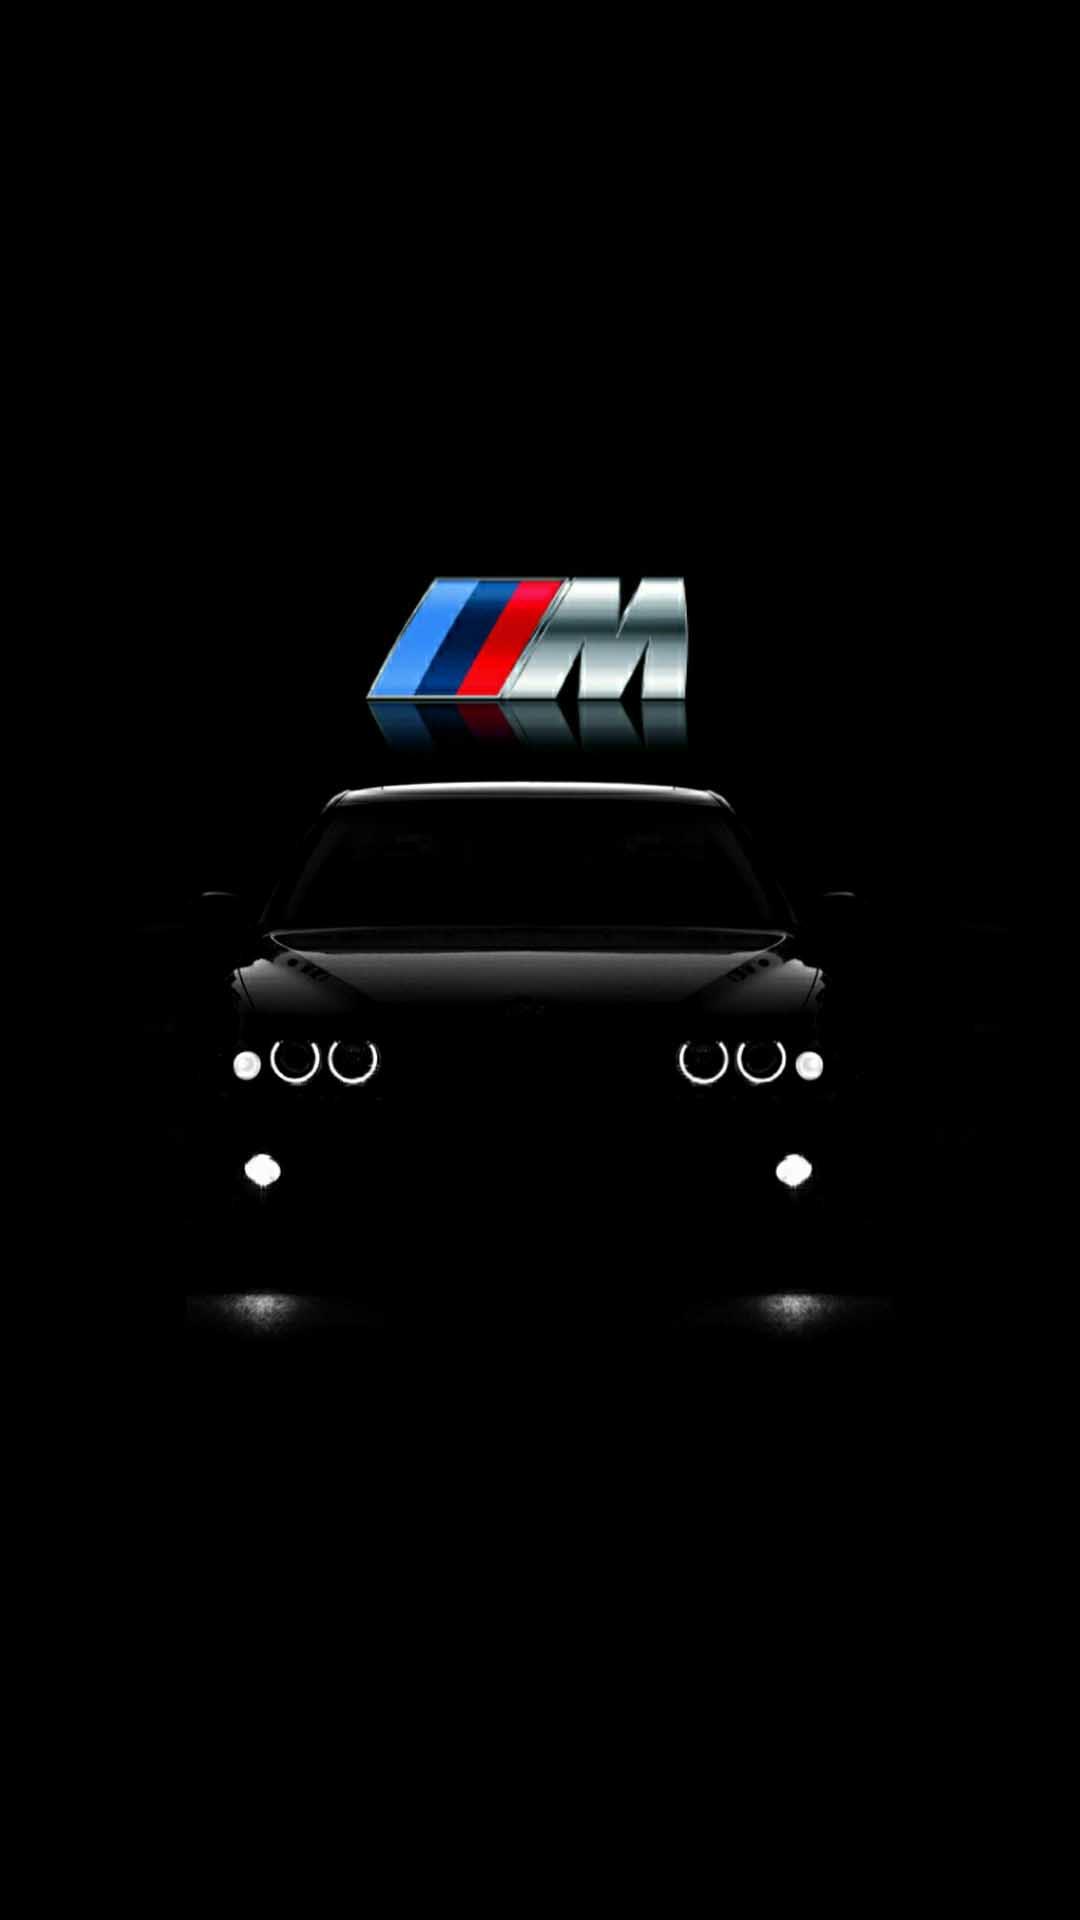 BMW Wallpapers for iPhone X, 8, 7, 6